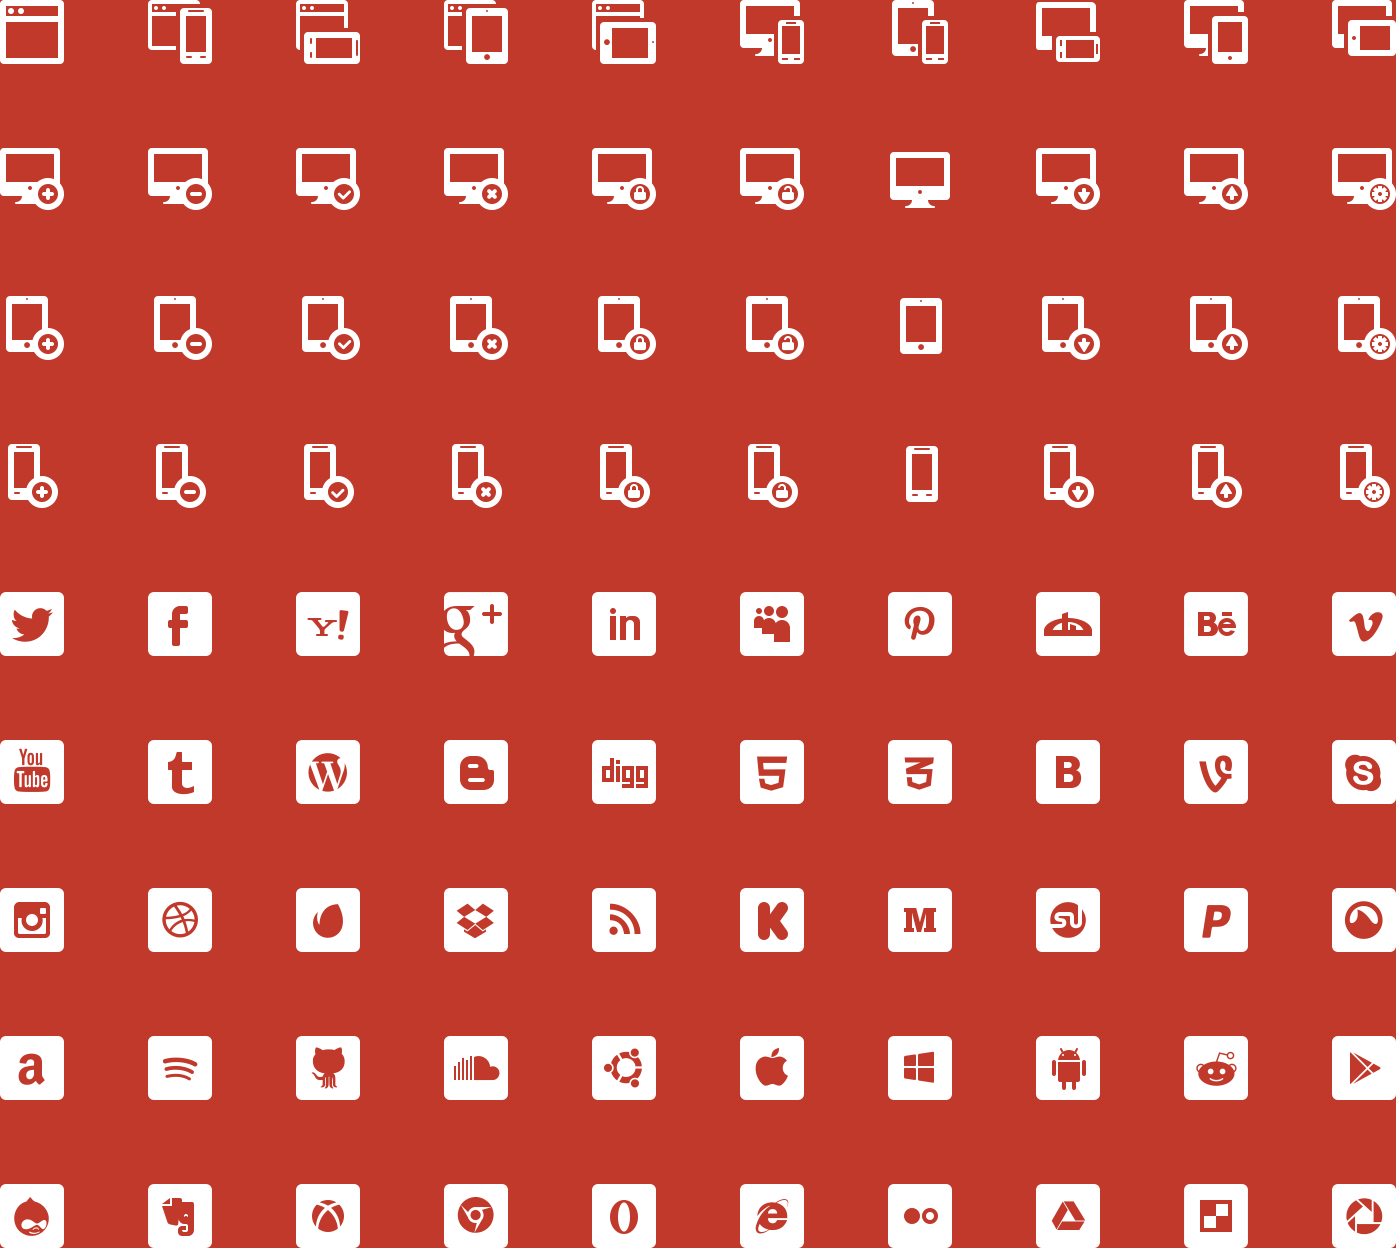 Tablets and Social Glyph Icons